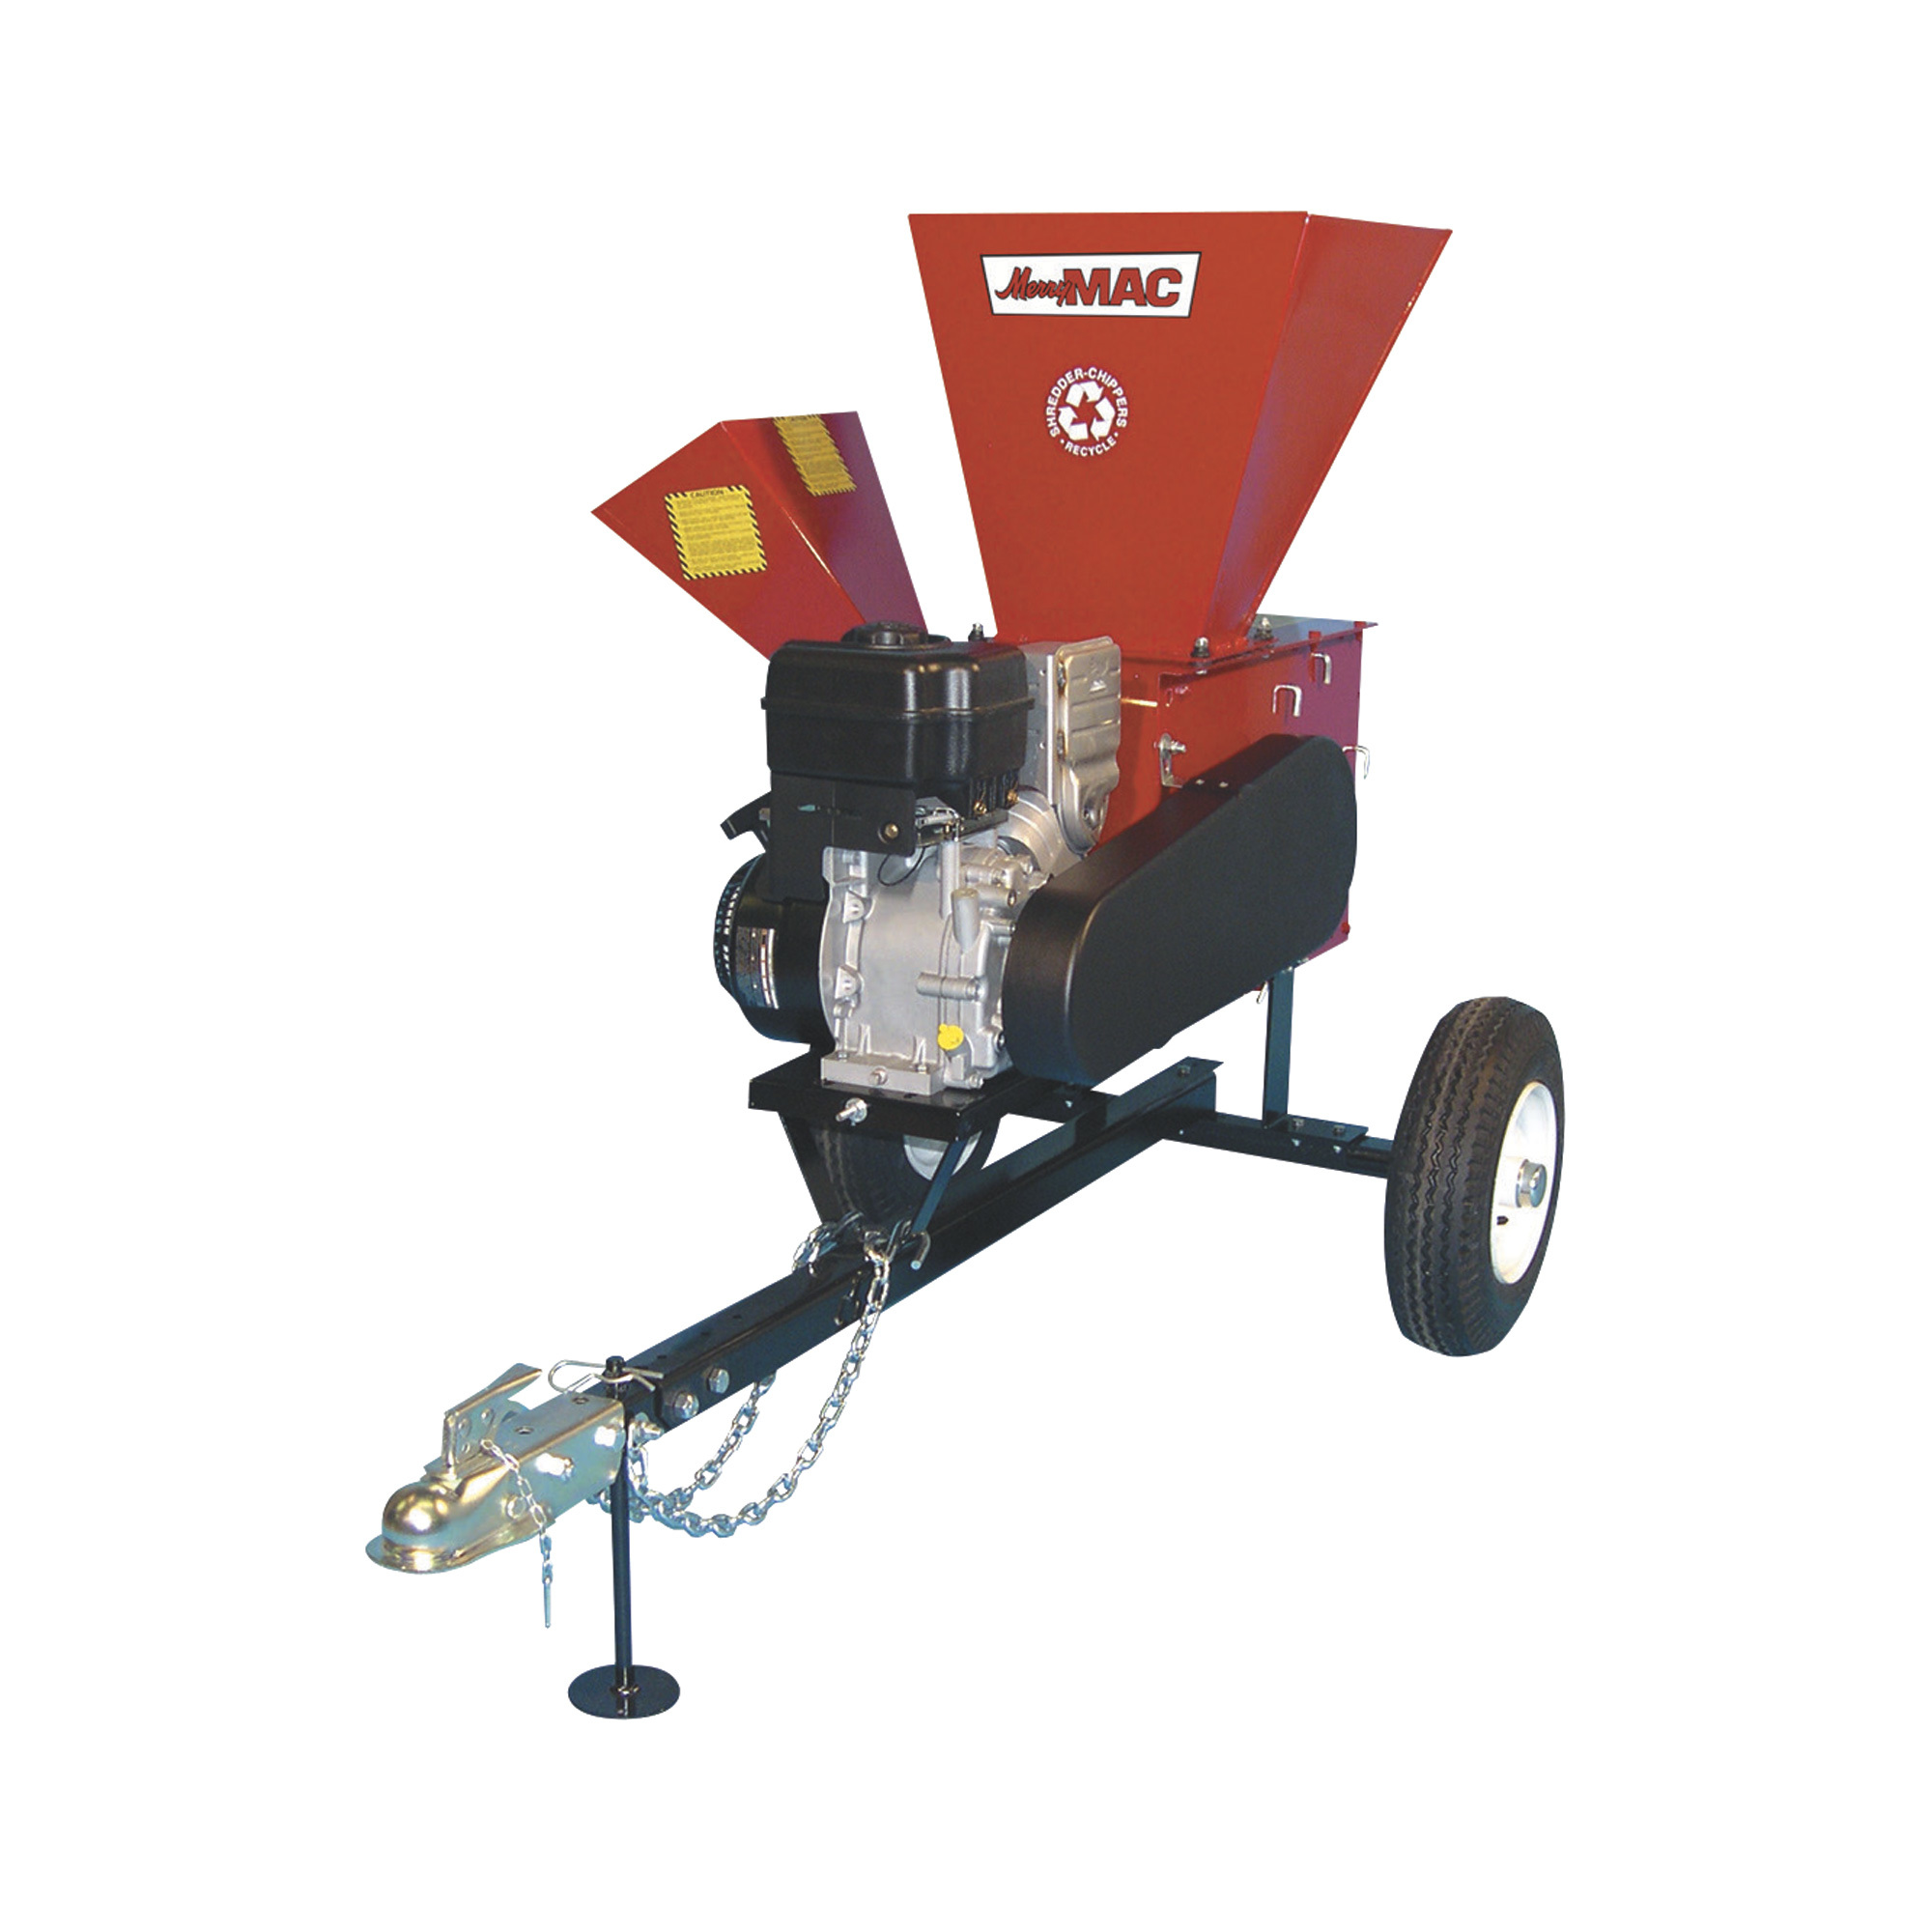 Highway-Towable Wood Chipper/Shredder — 249cc Briggs & Stratton 1150 Series OHV Engine, 3 1/2Inch Chipping Capacity, Model - Merry Mac 12PHT1100M